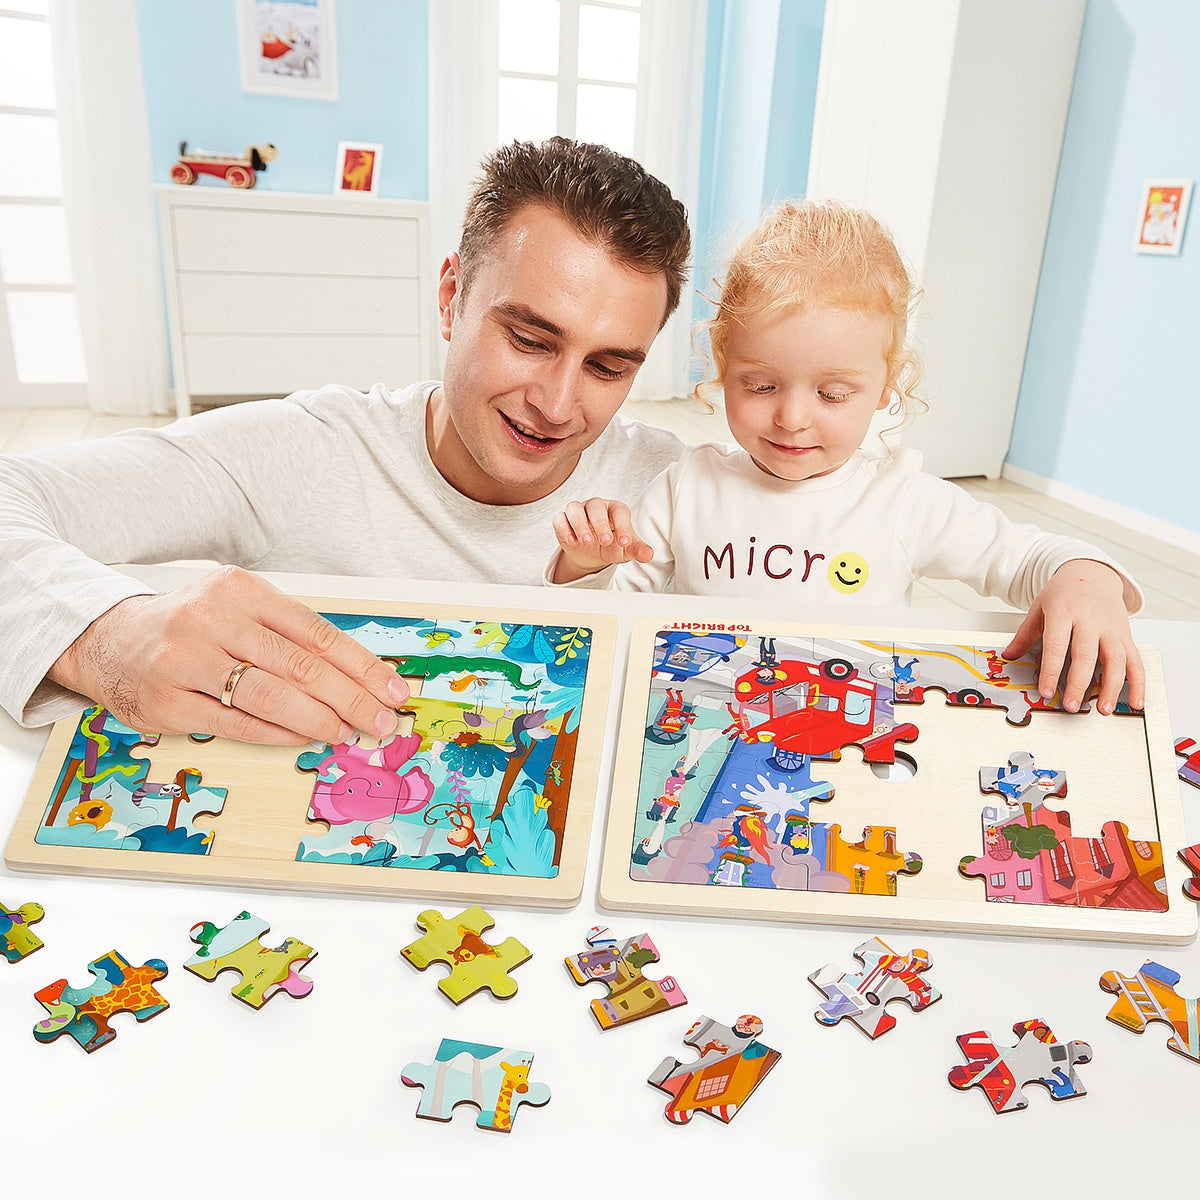 Our practical wooden frame makes solving the puzzle even easier for little puzzle pros because nothing can slide out of place.